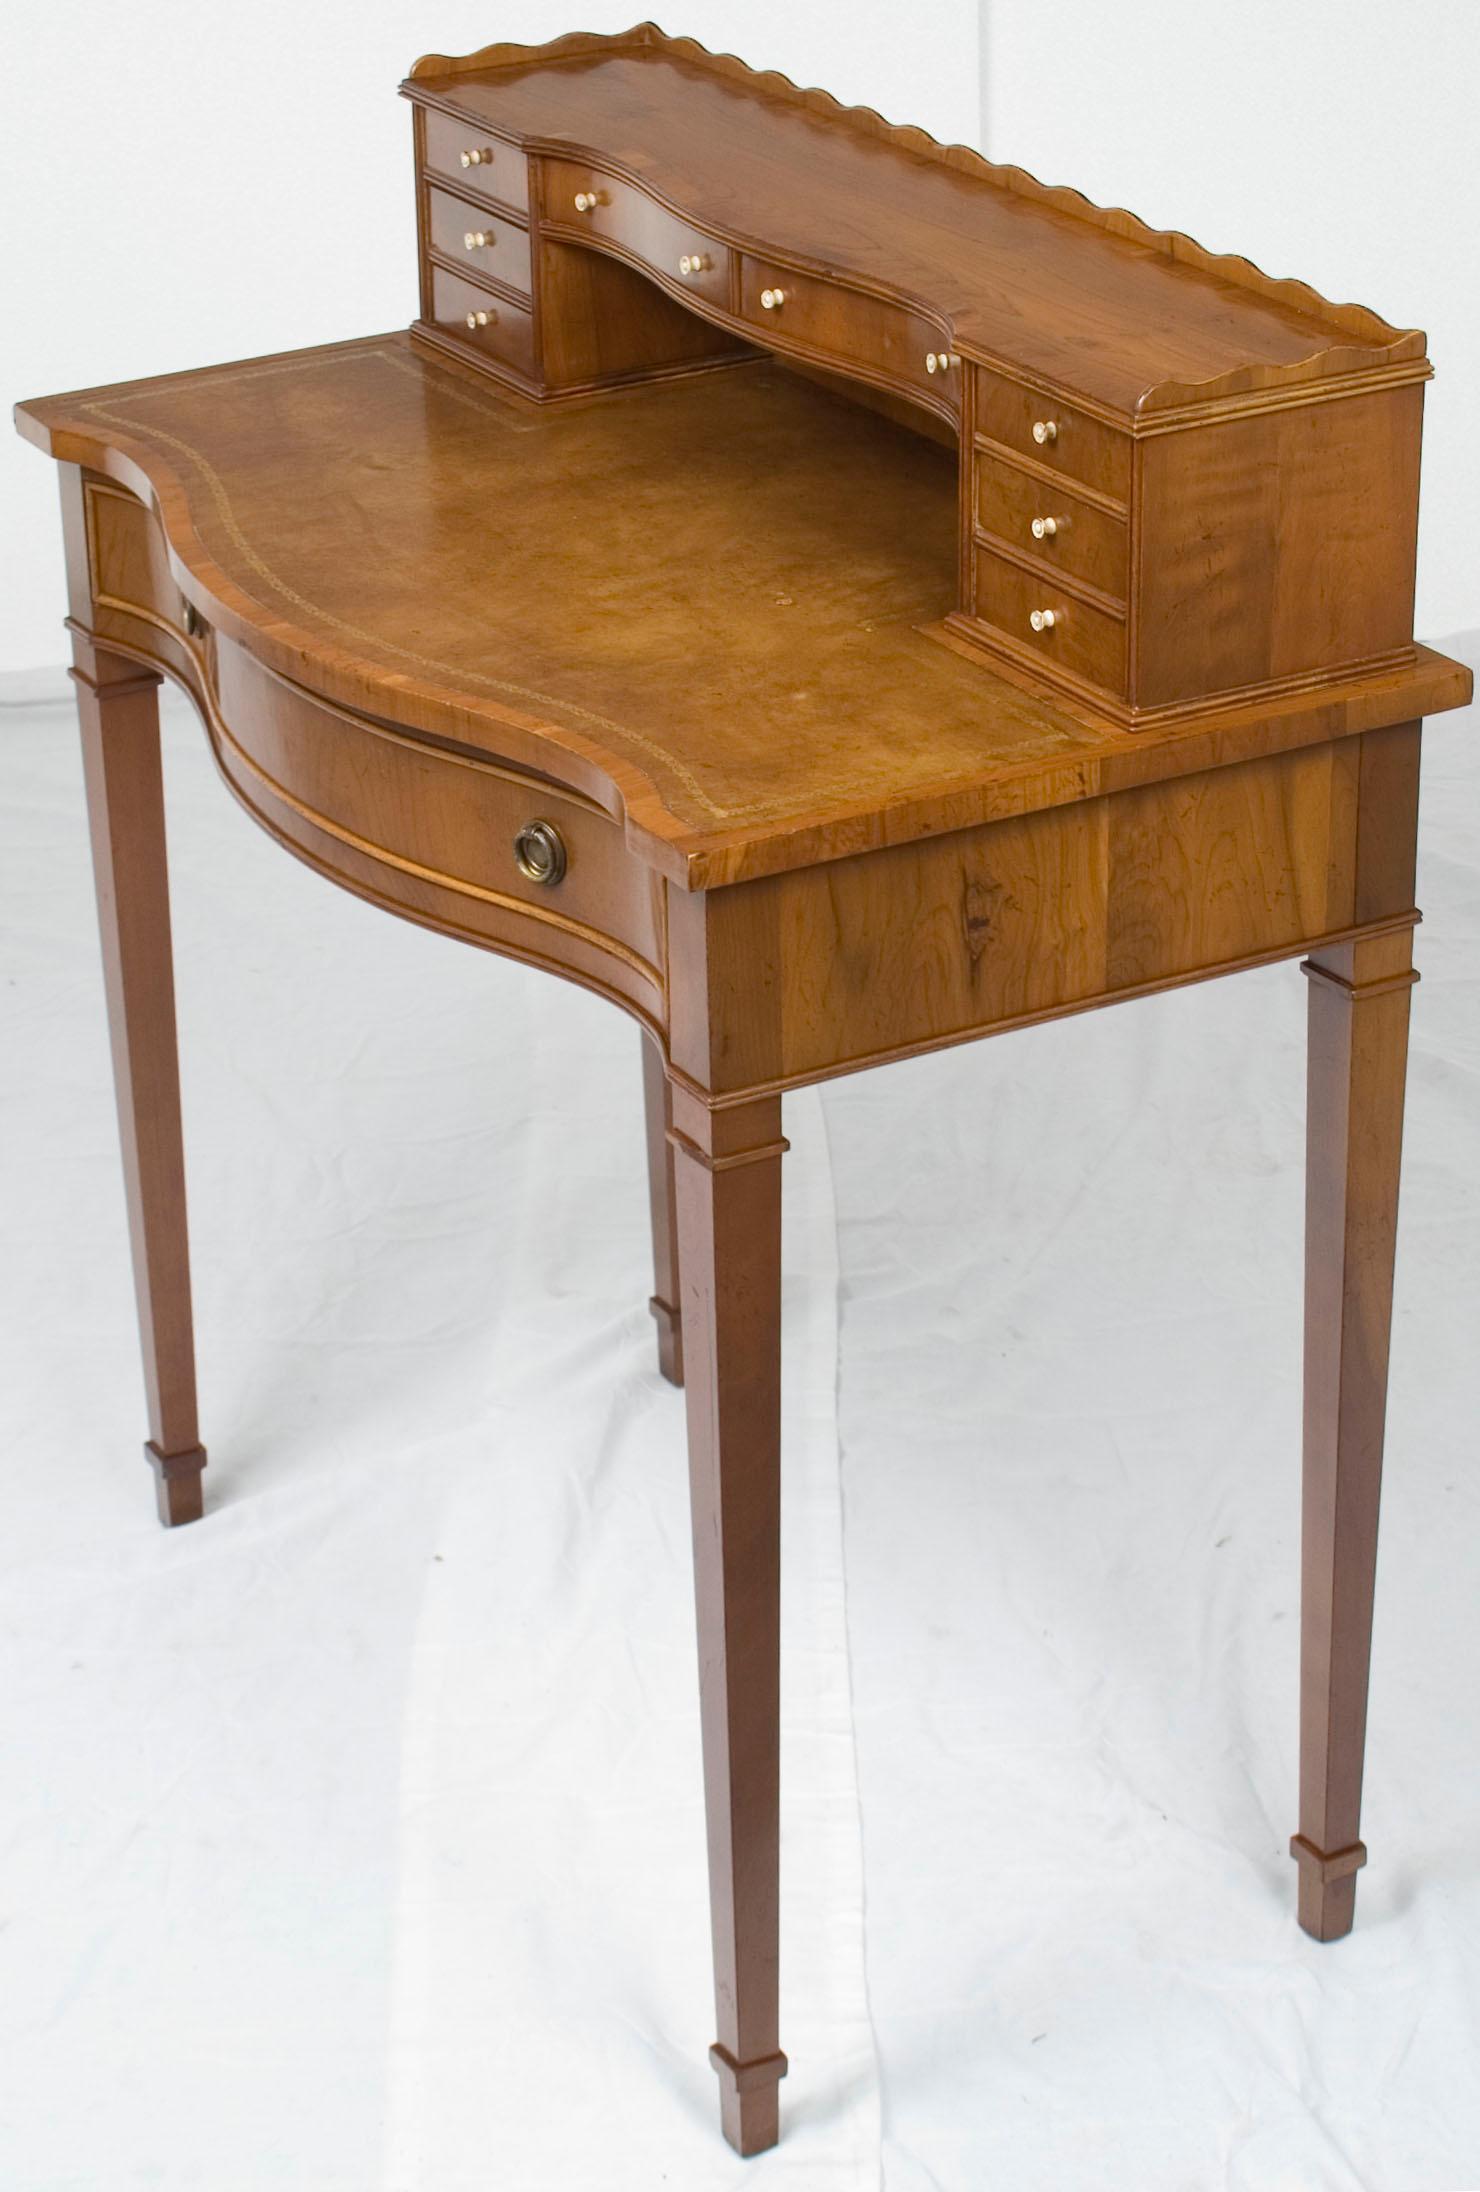 Small Yew Wood Leather Top Regency Style Writing Table Desk with Drawers 3